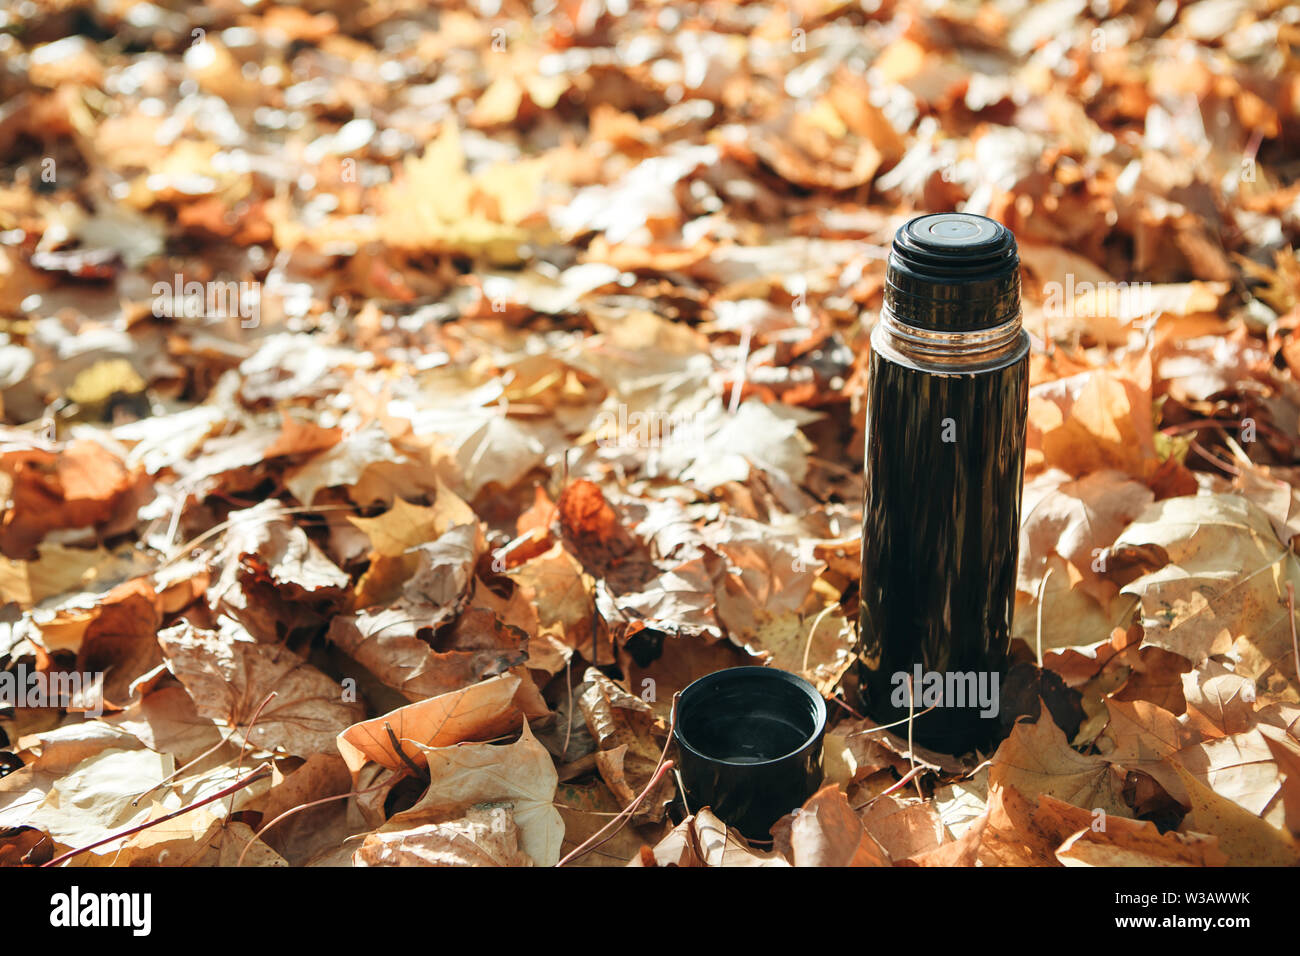 Thermos on the background of autumn leaves. Stock Photo